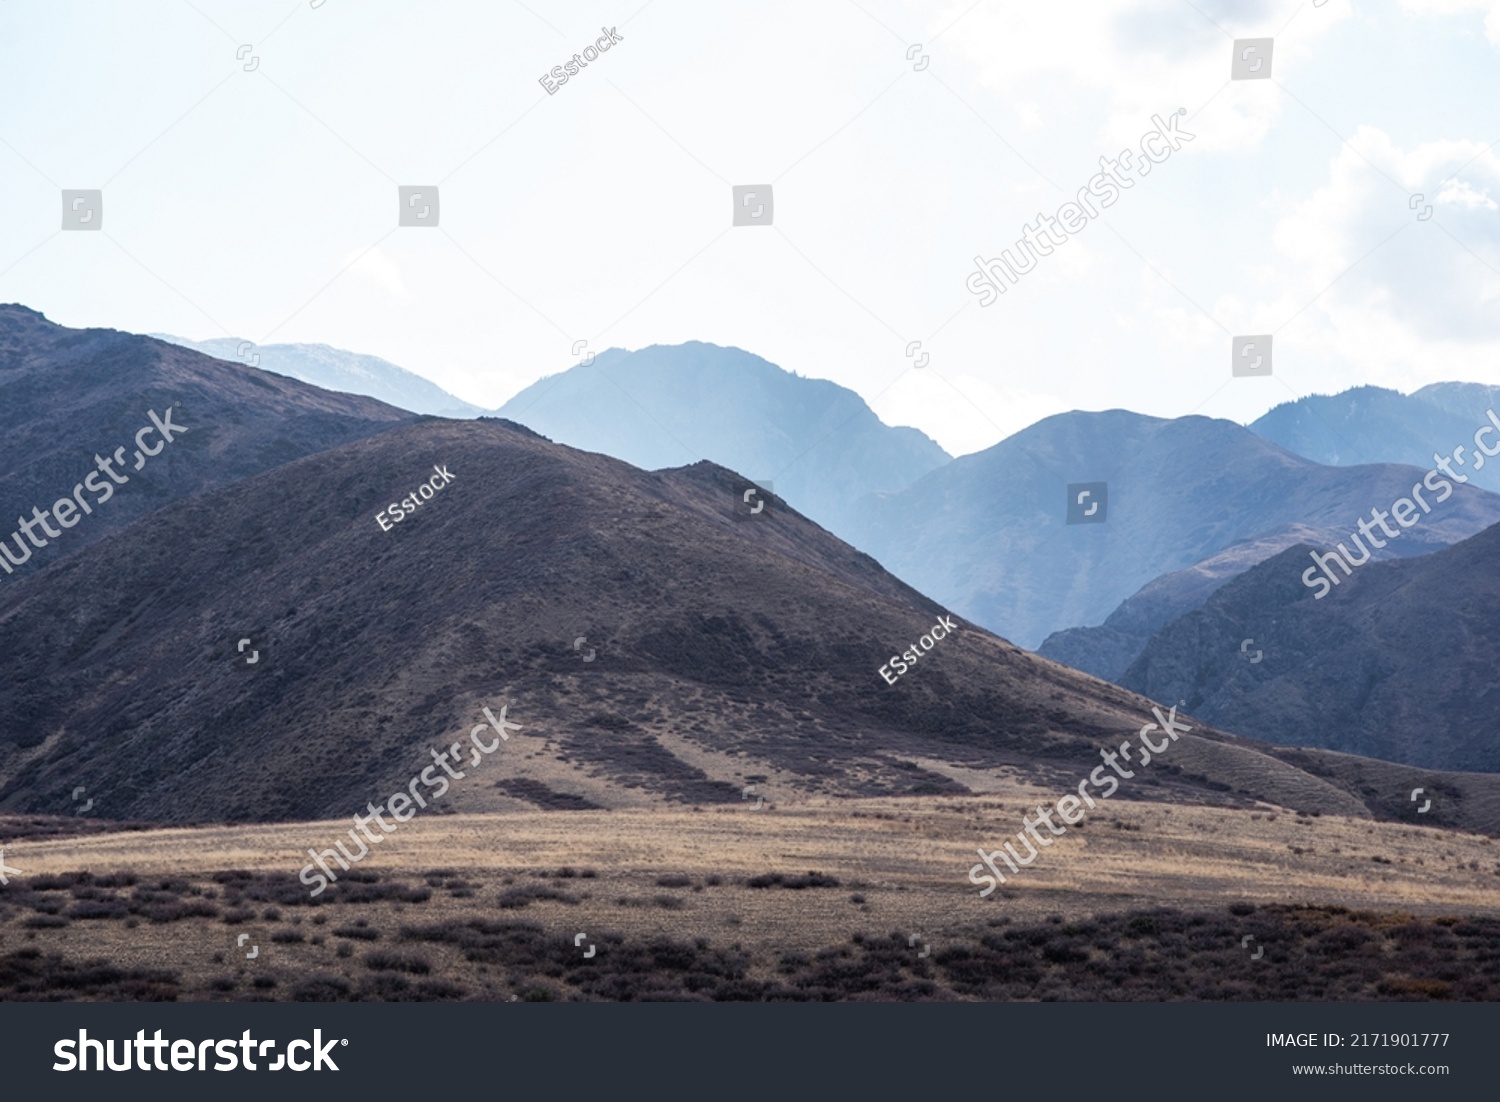 Unusual mountain landscape on a dull autumn day. Remote foothill areas in northern China. Dry grassy fields and hills. Natural background. Exploration of new places, travel to remote locations. #2171901777